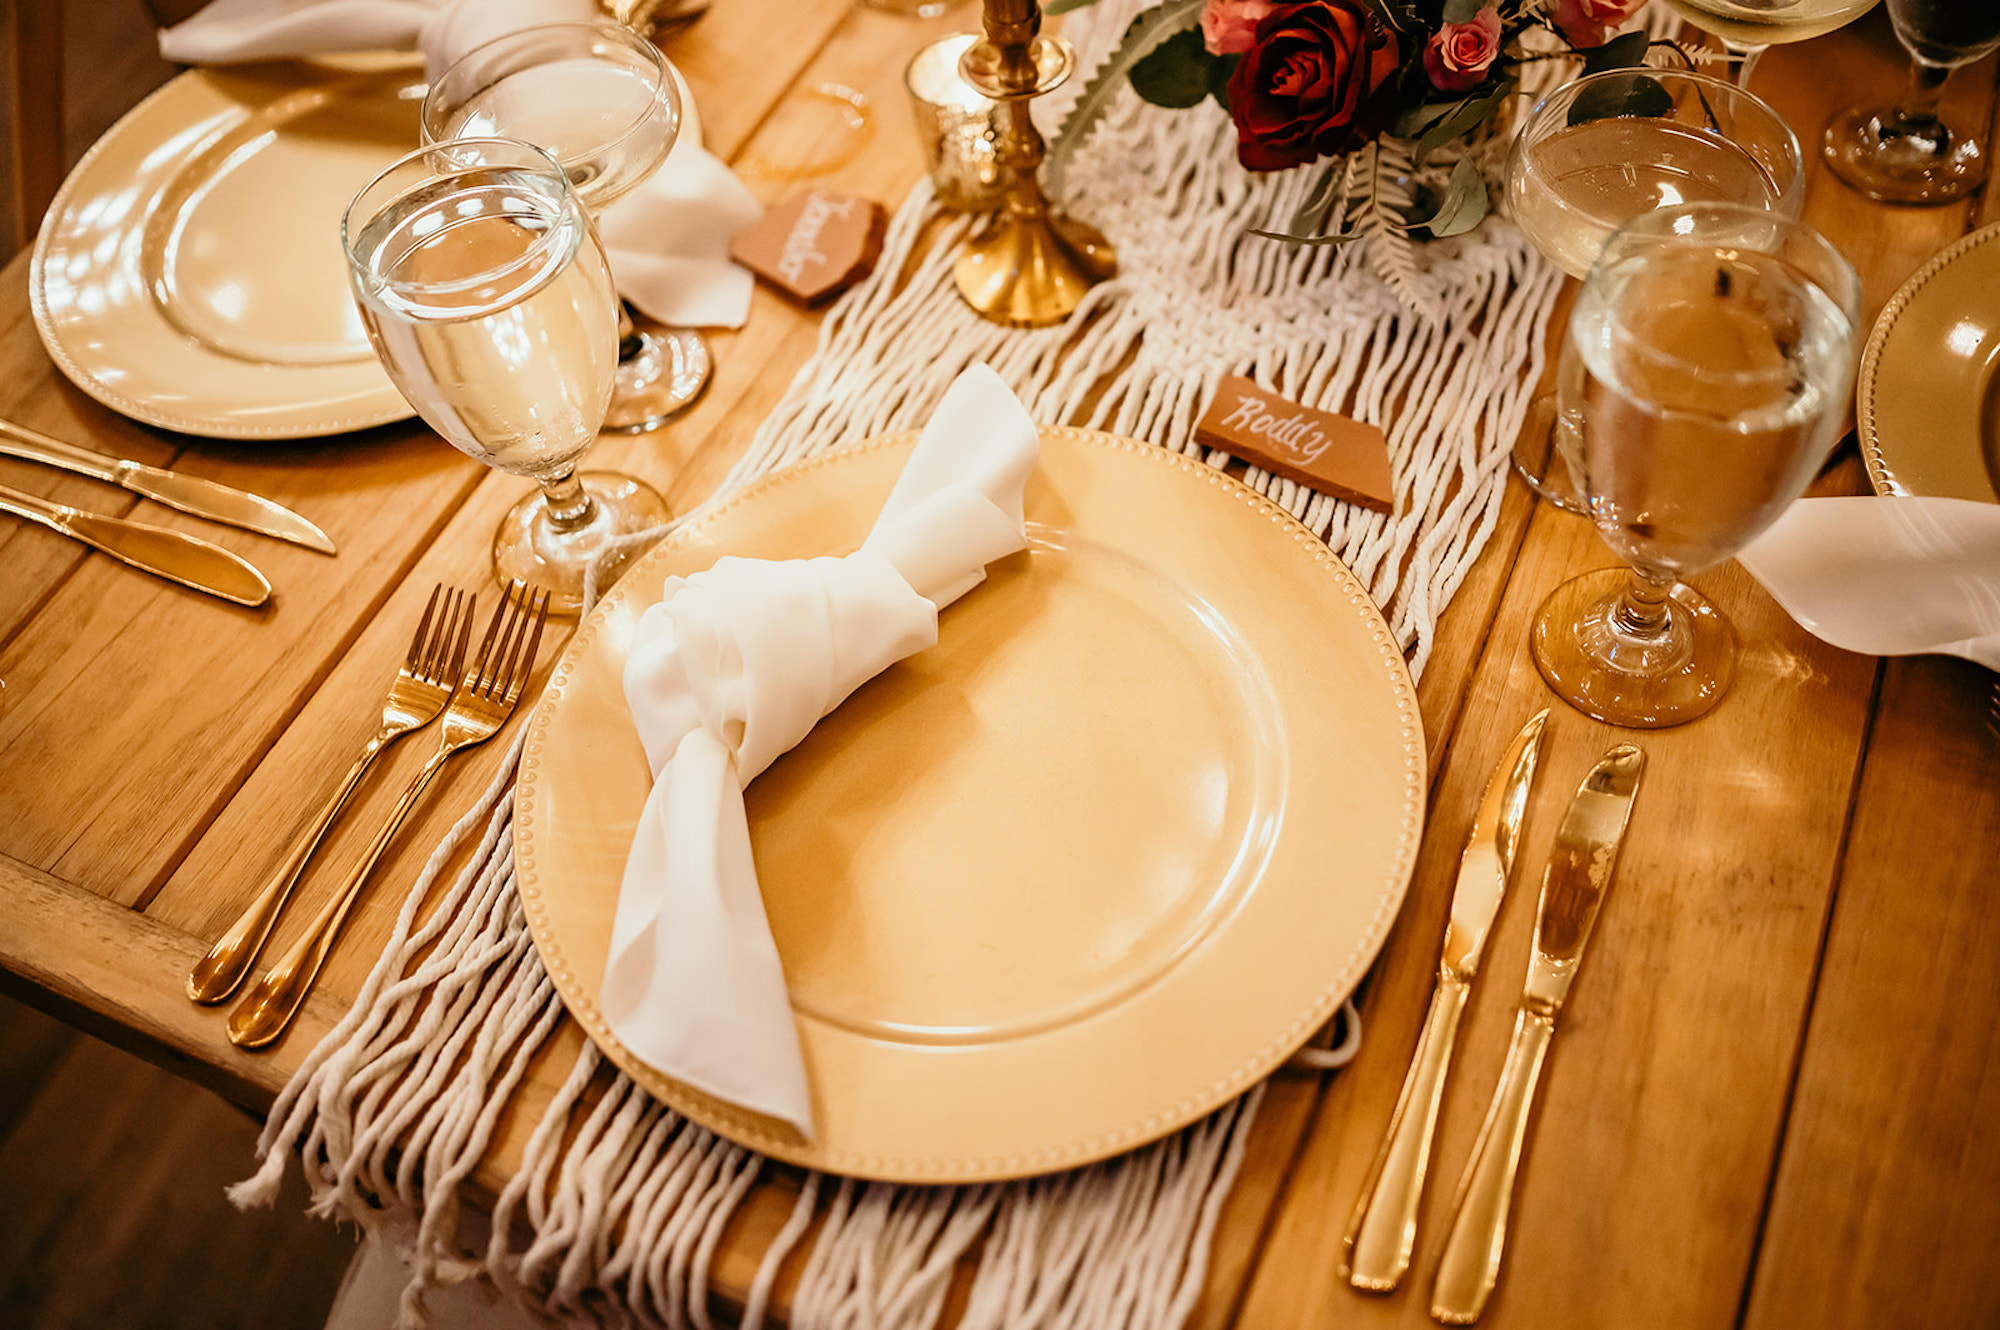 Boho Wedding Reception Table Decor Inspiration | Gold Chargers and Flatware | Terracotta Place Cards | Macrame Table Runner